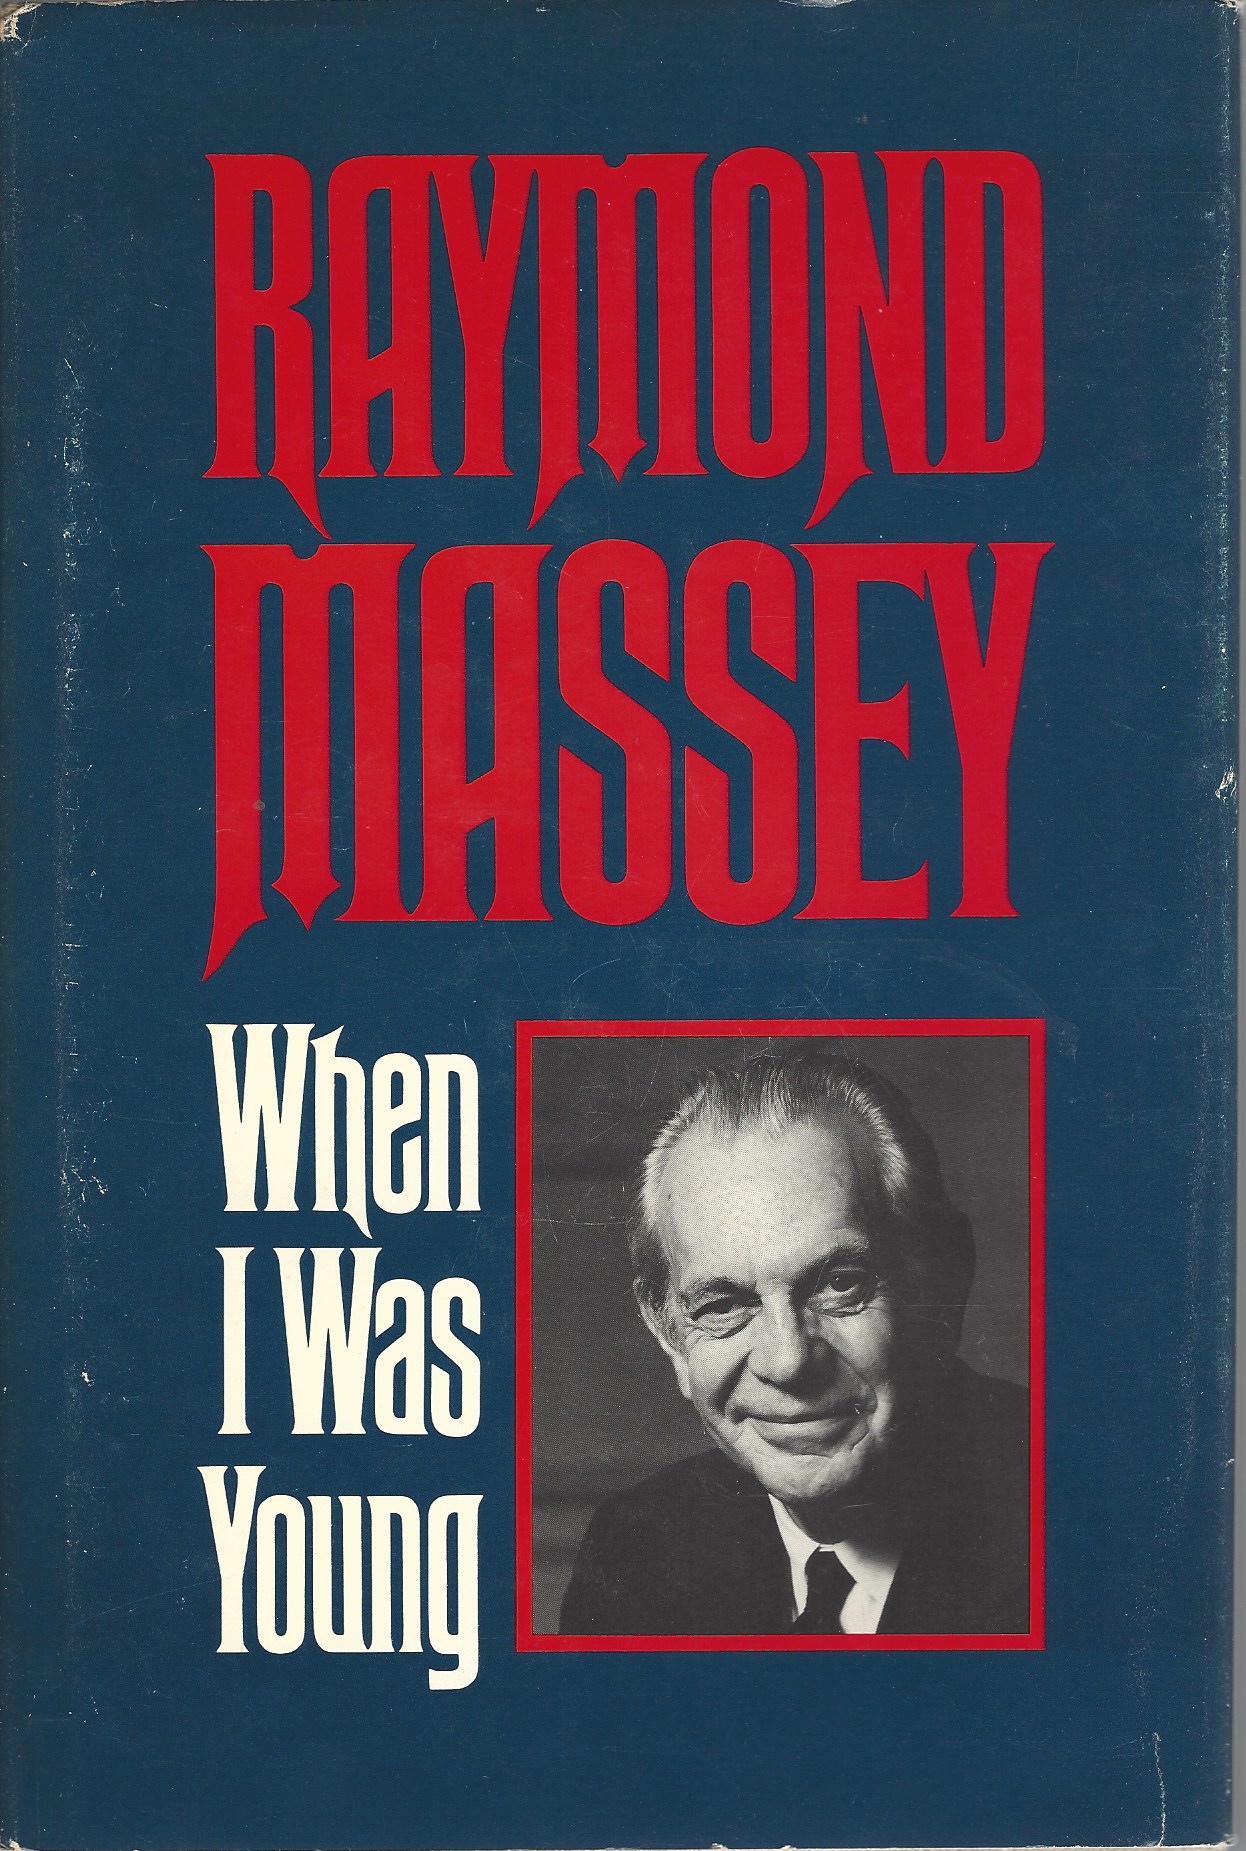 MASSEY RAYMOND - When I Was Young